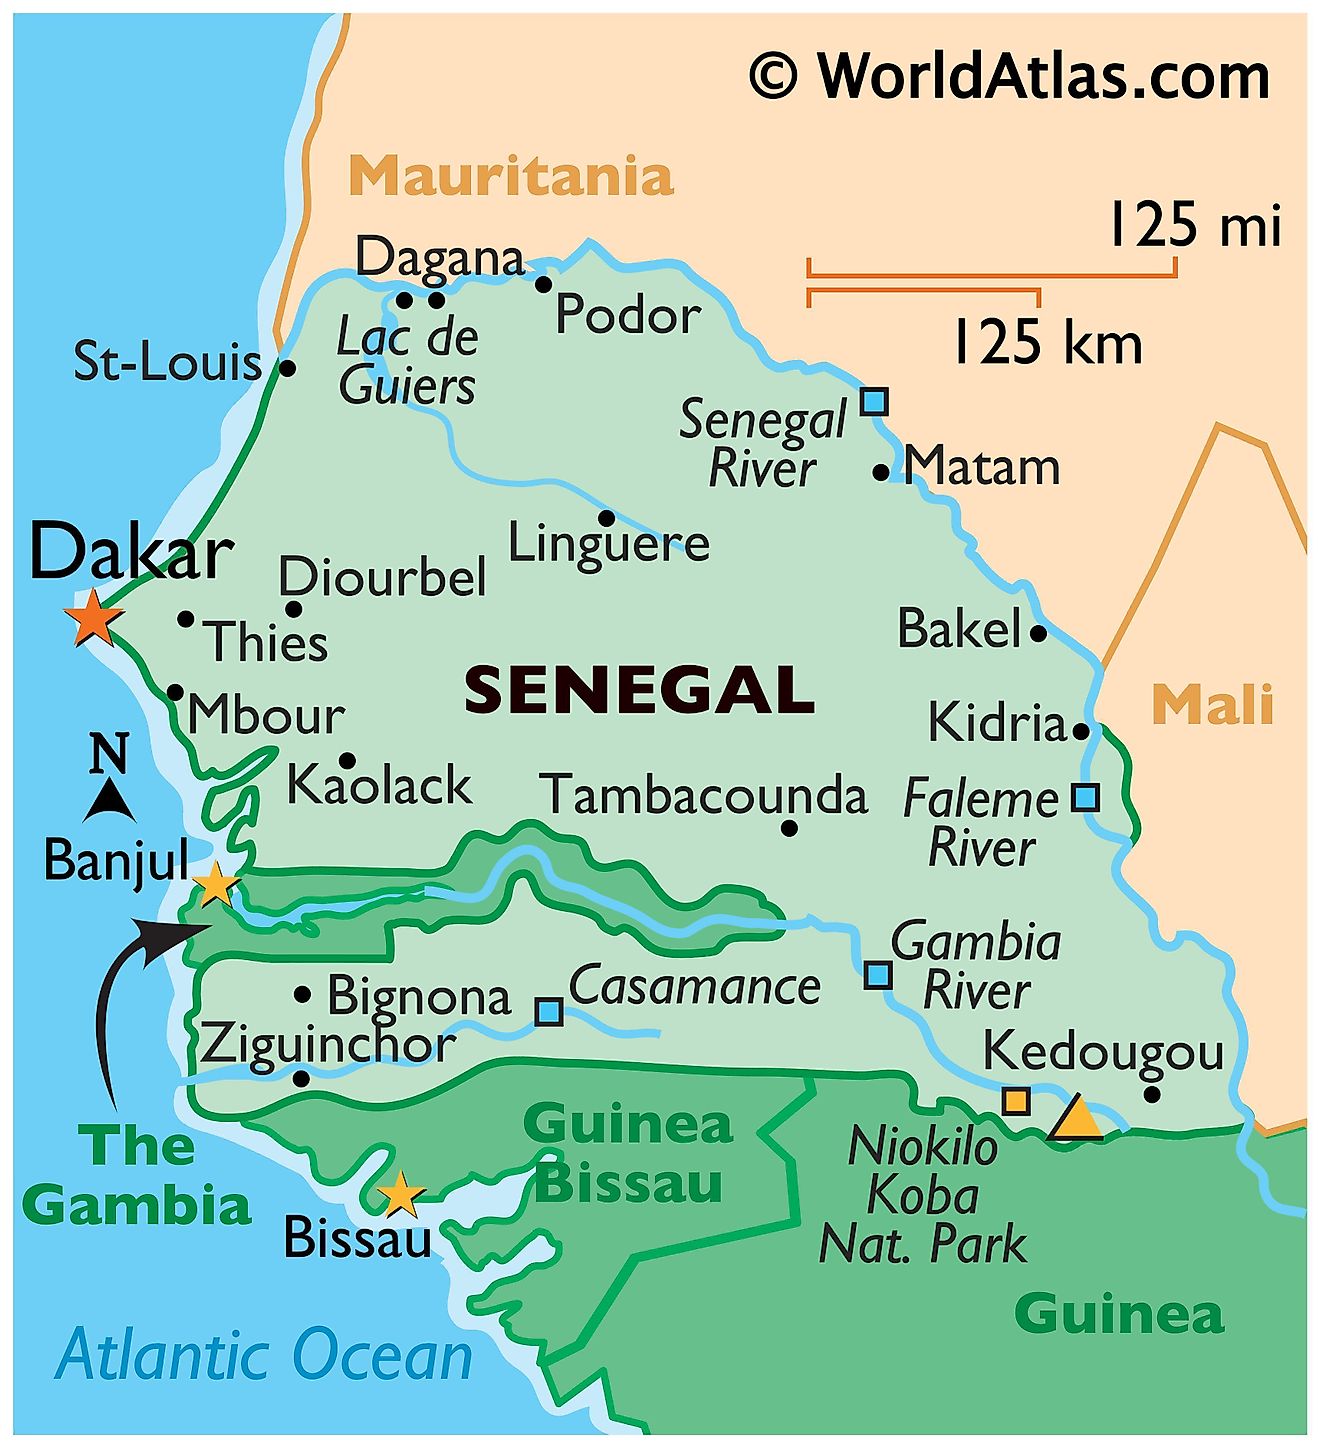 Phyiscal Map of Senegal with state boundaries. It shows the physical features of Senegal including relief, mountain ranges, rivers, and major cities.